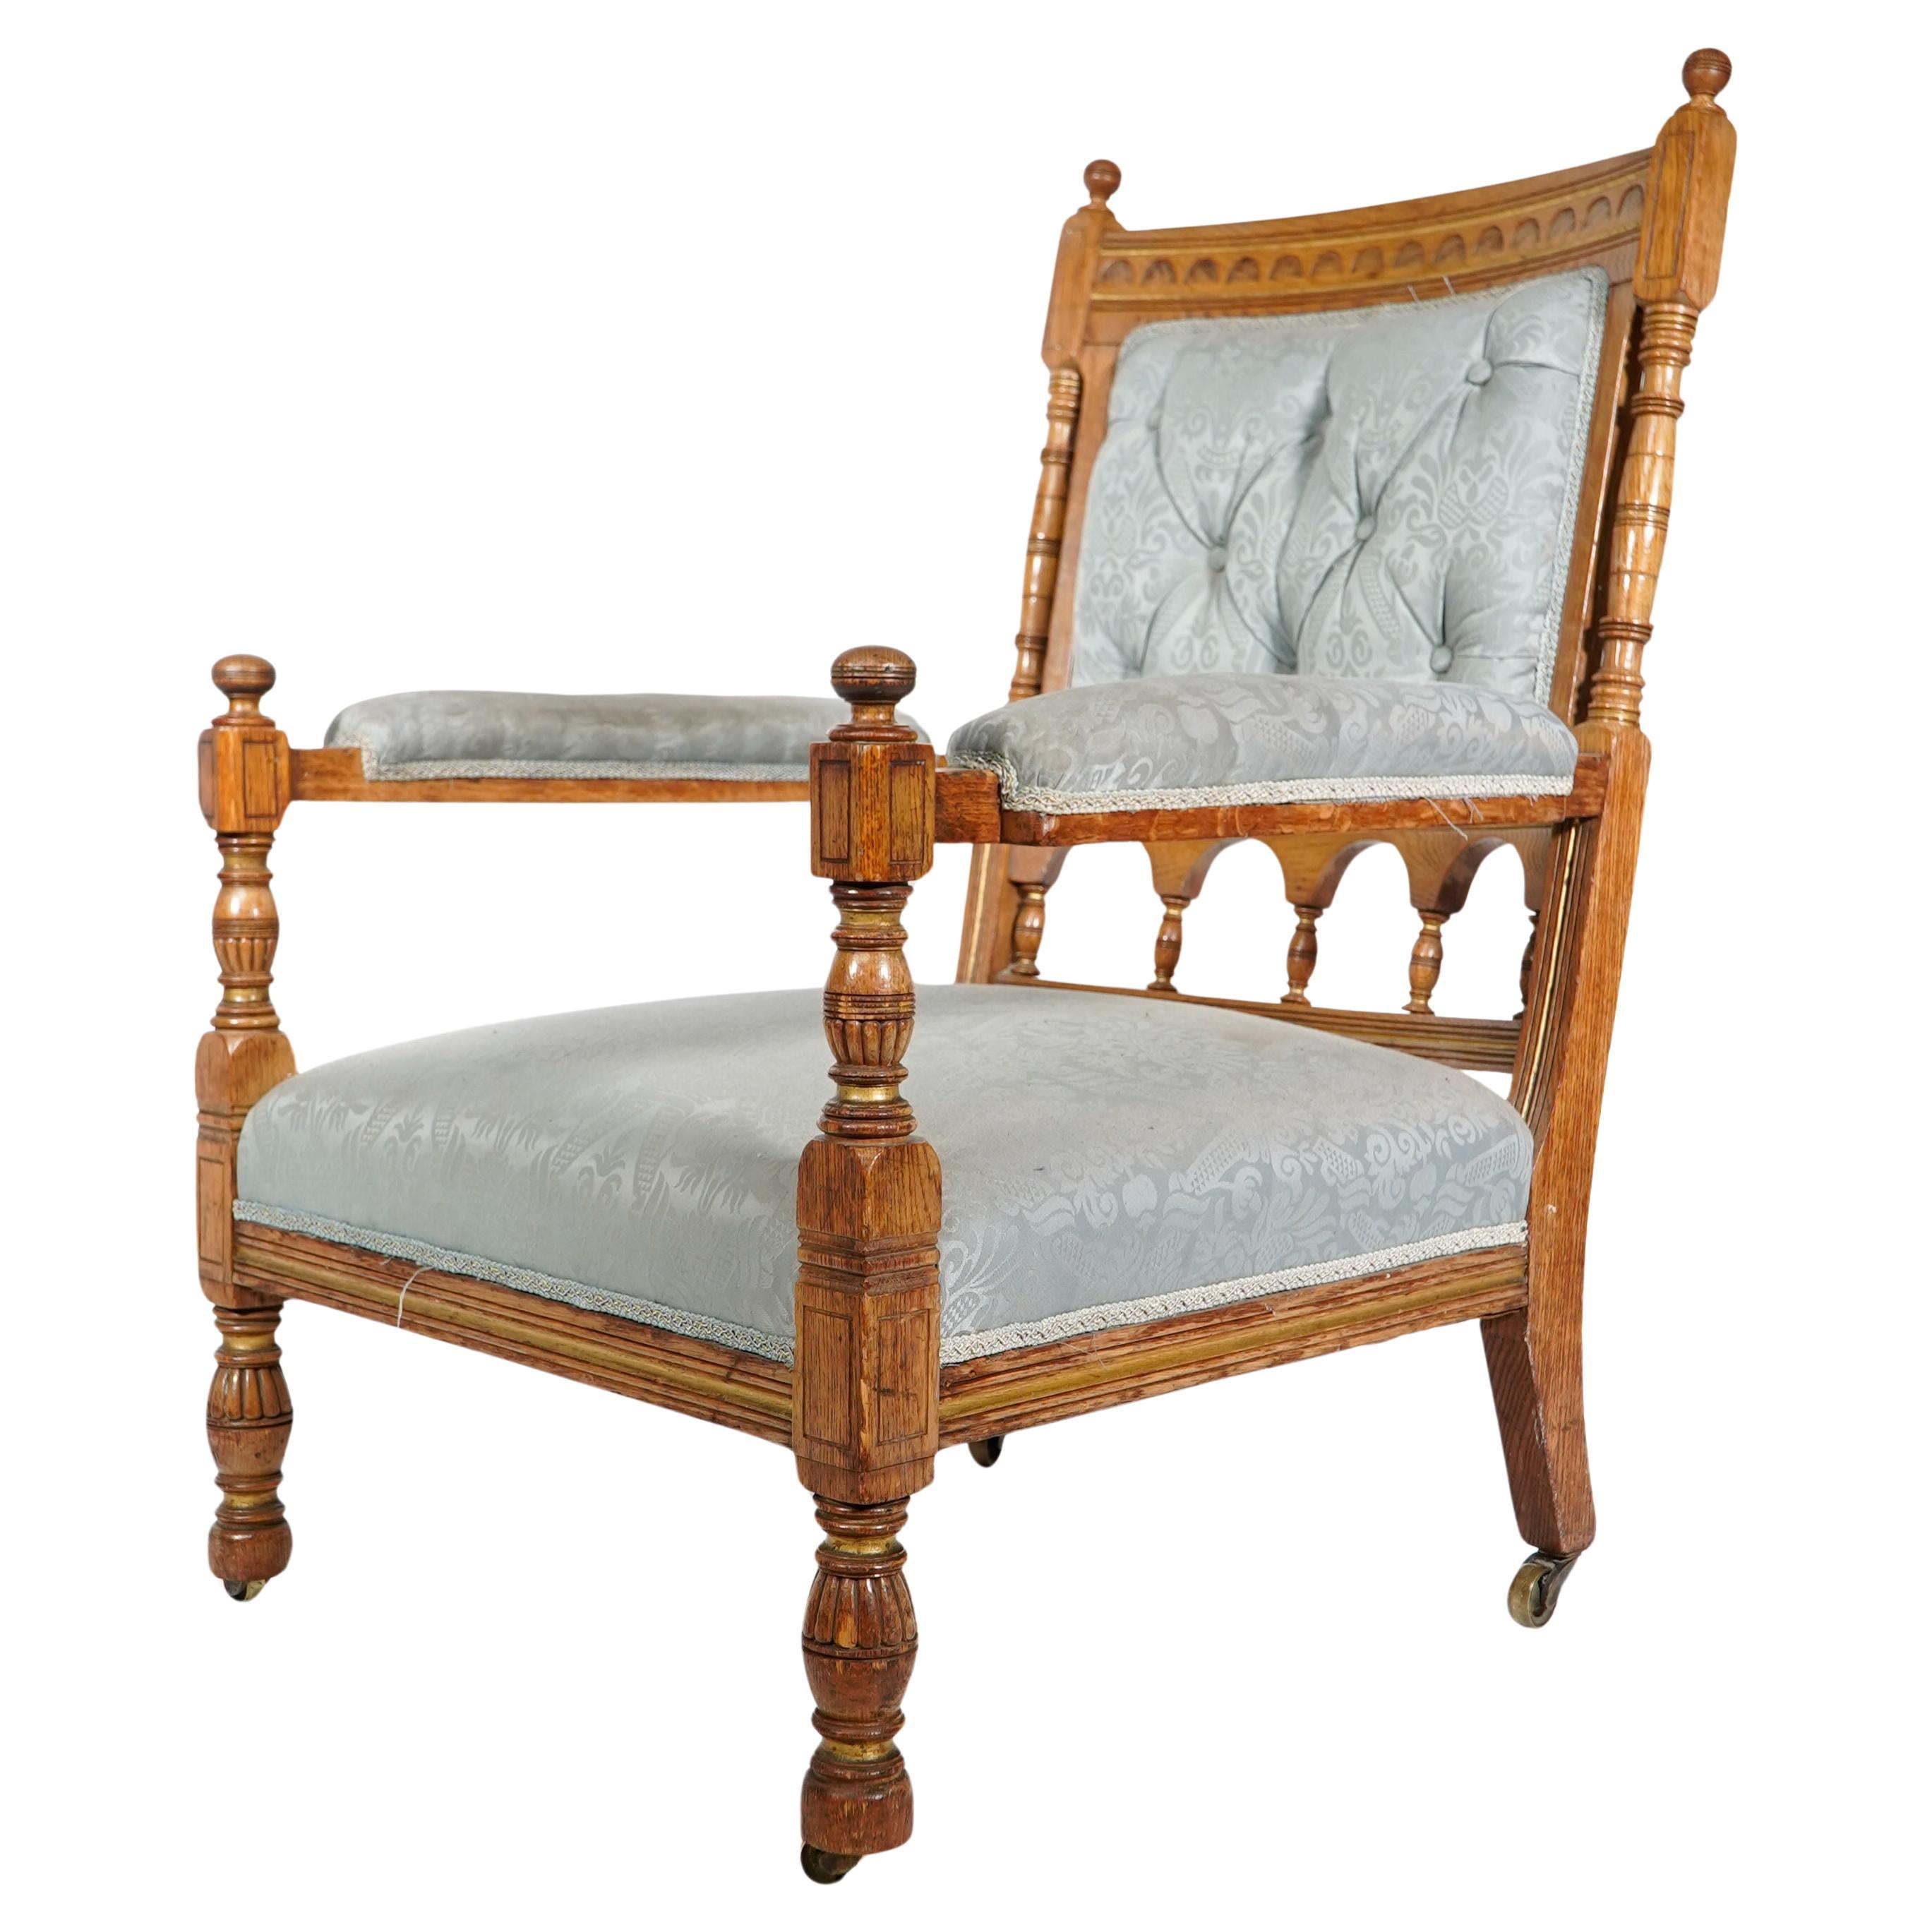 Bruce Talbert, stamped Gillows. An Aesthetic Movement upholstered oak armchair. For Sale